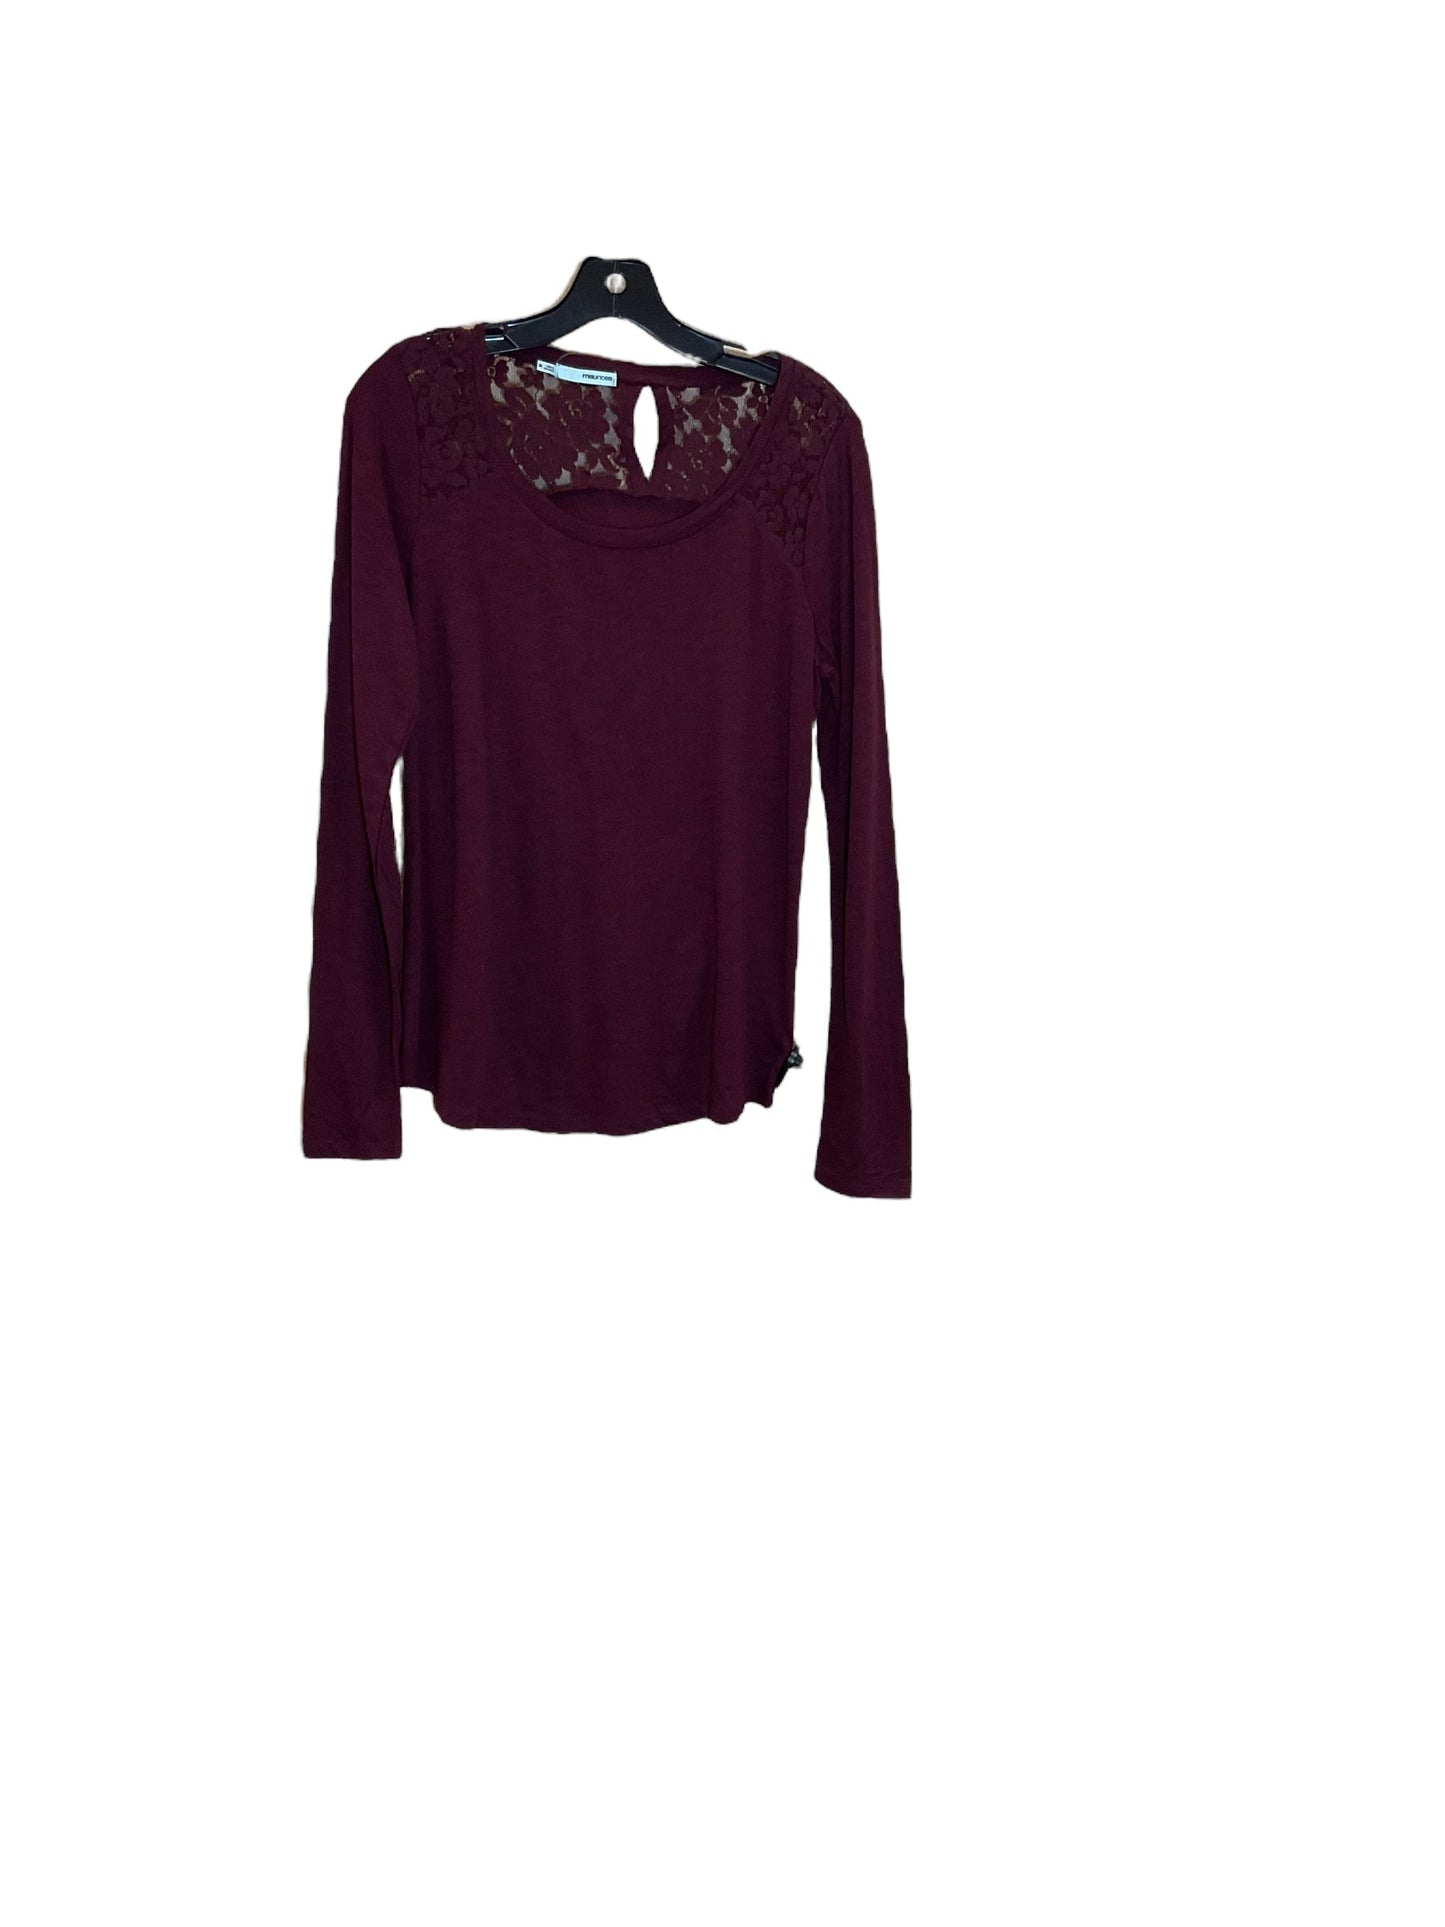 Purple Top Long Sleeve Maurices, Size M